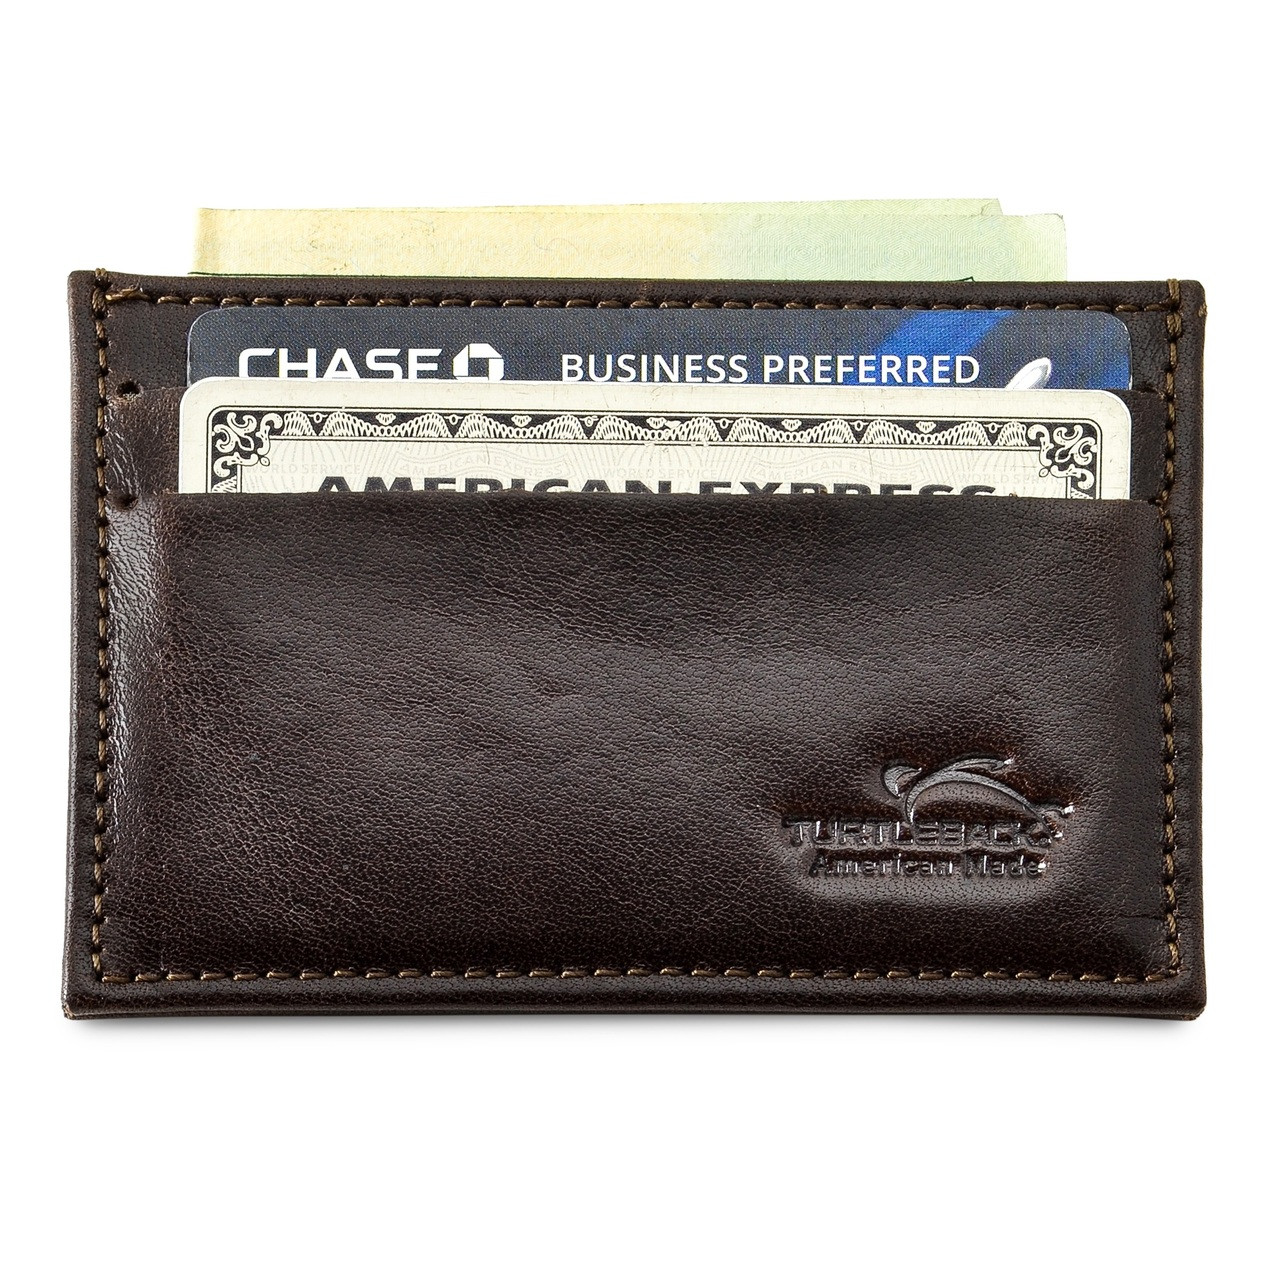 Shop Branded Wallet For Men Leather With Box with great discounts